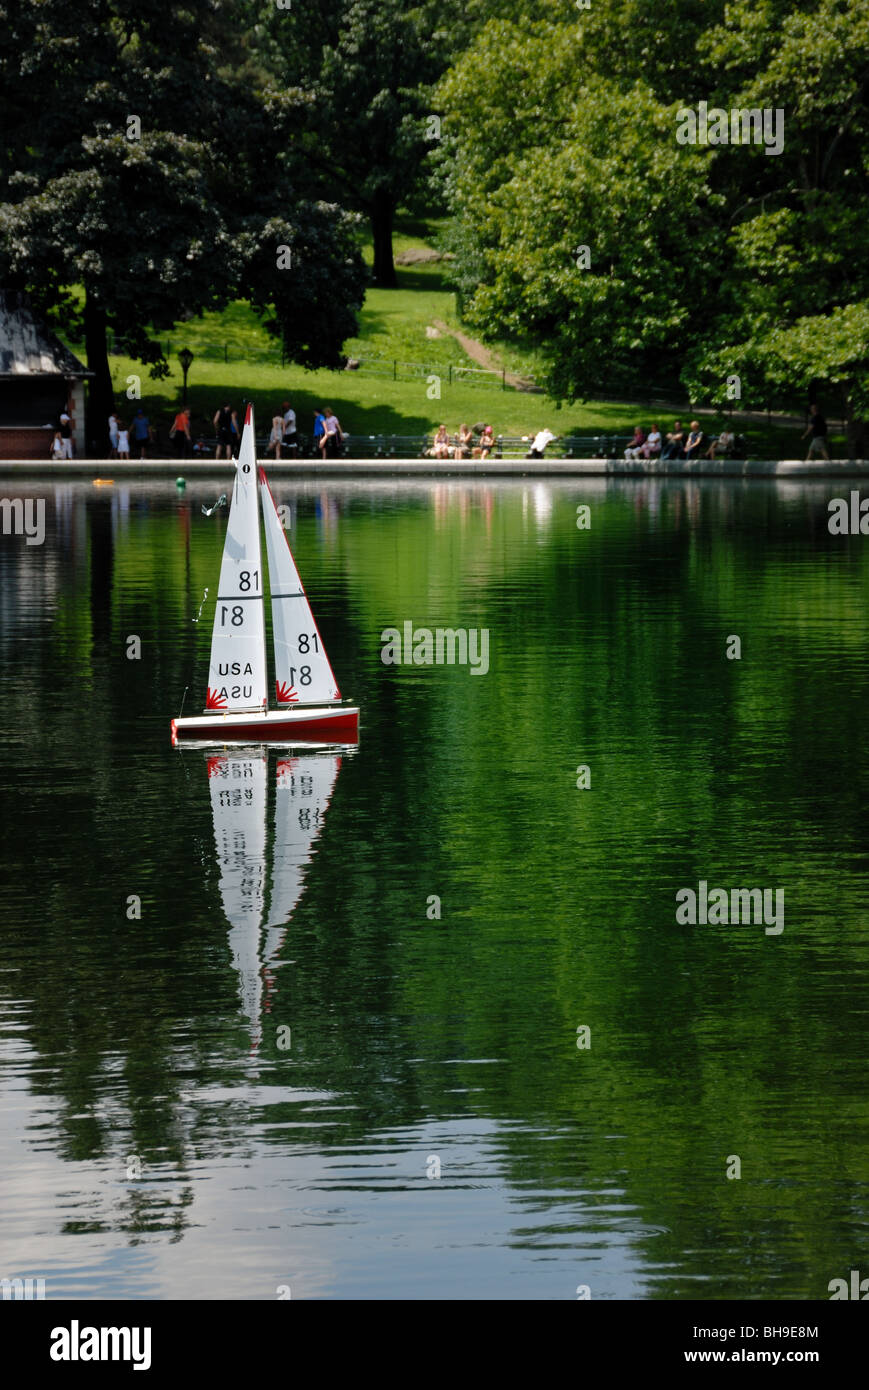 A model sailboat glides across the water at the Model Boat Basin in Central Park, New York city. Stock Photo